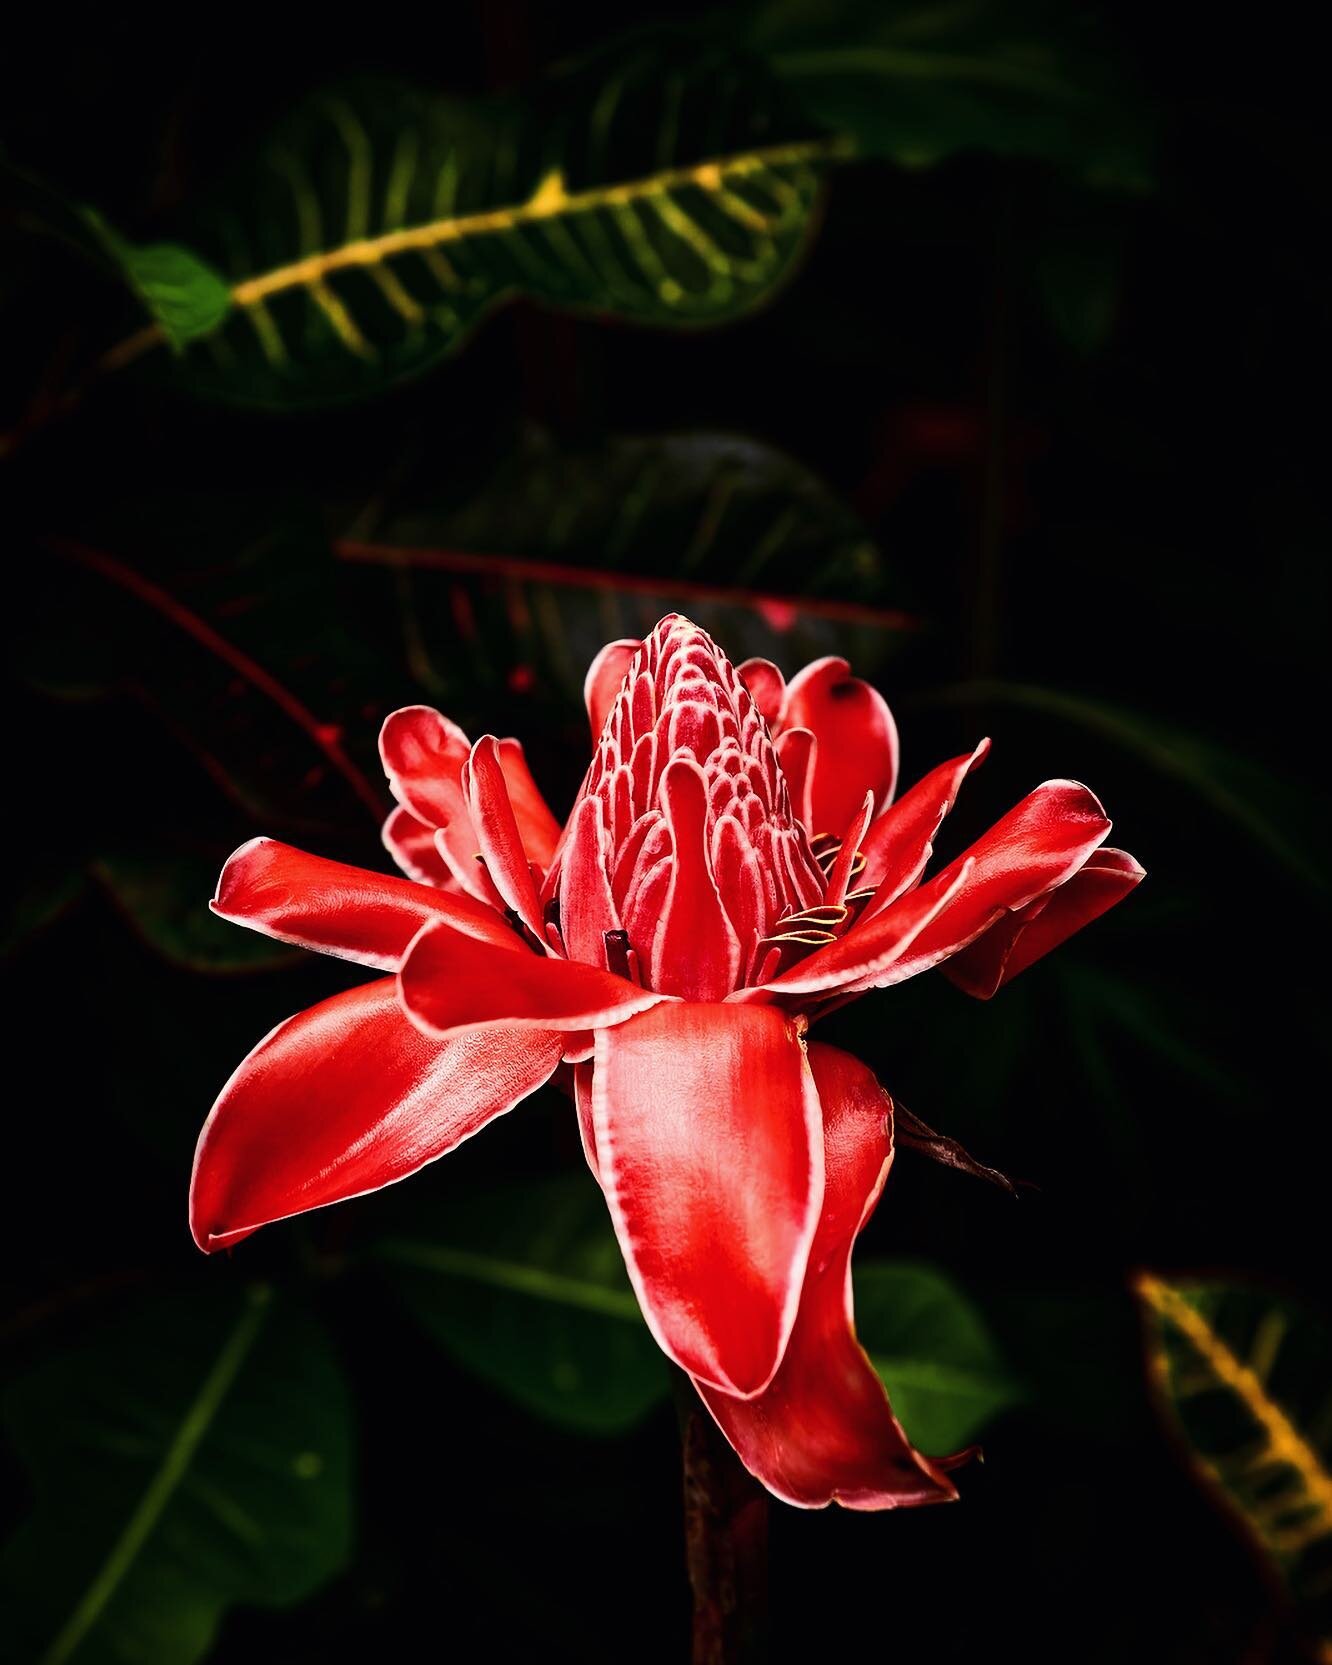 El Baston del Emperador ❤️ is my absolute favorite tropical plant 😍 it has a very tall stalk and waxy gorgeous red petals and is so striking in many stages of its opening up/blossoming. The English translation means the emperor&rsquo;s staff. I love